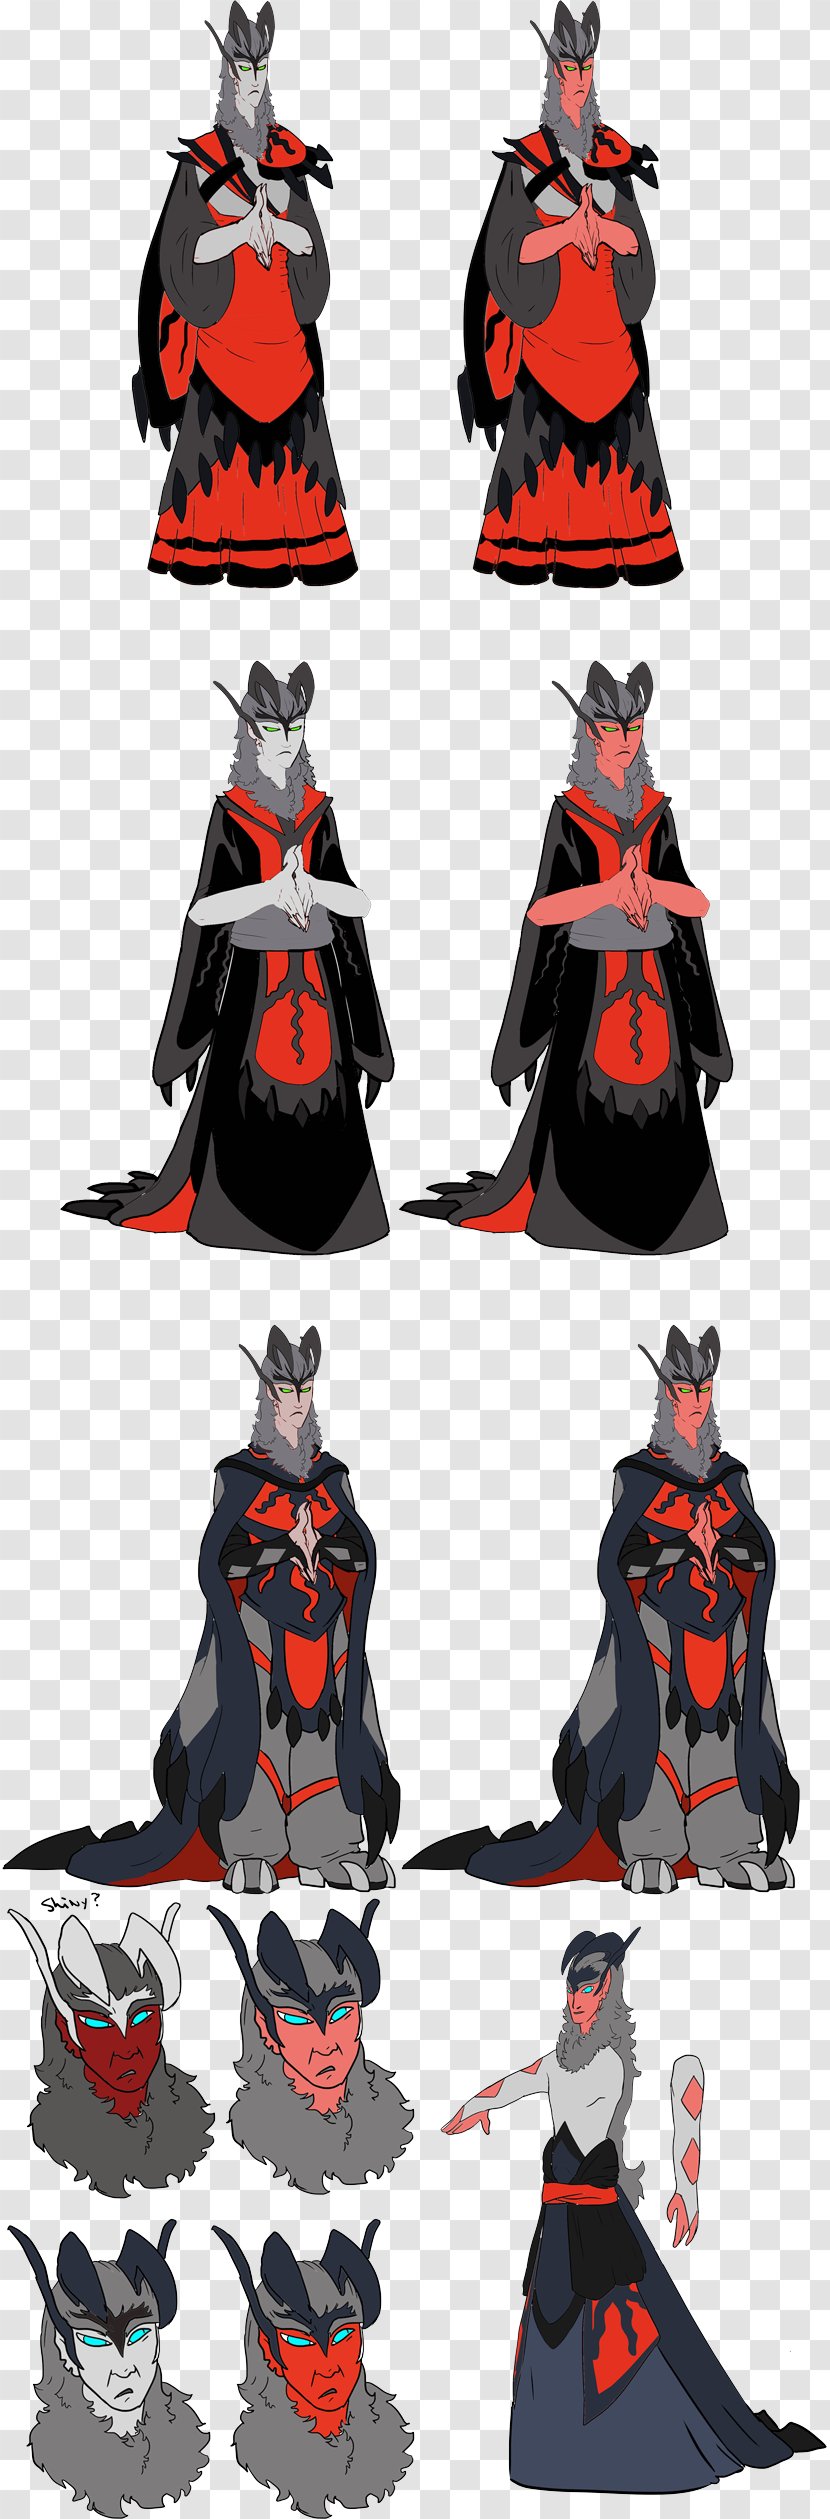 Costume Design Outerwear Character - Comming Soon Transparent PNG